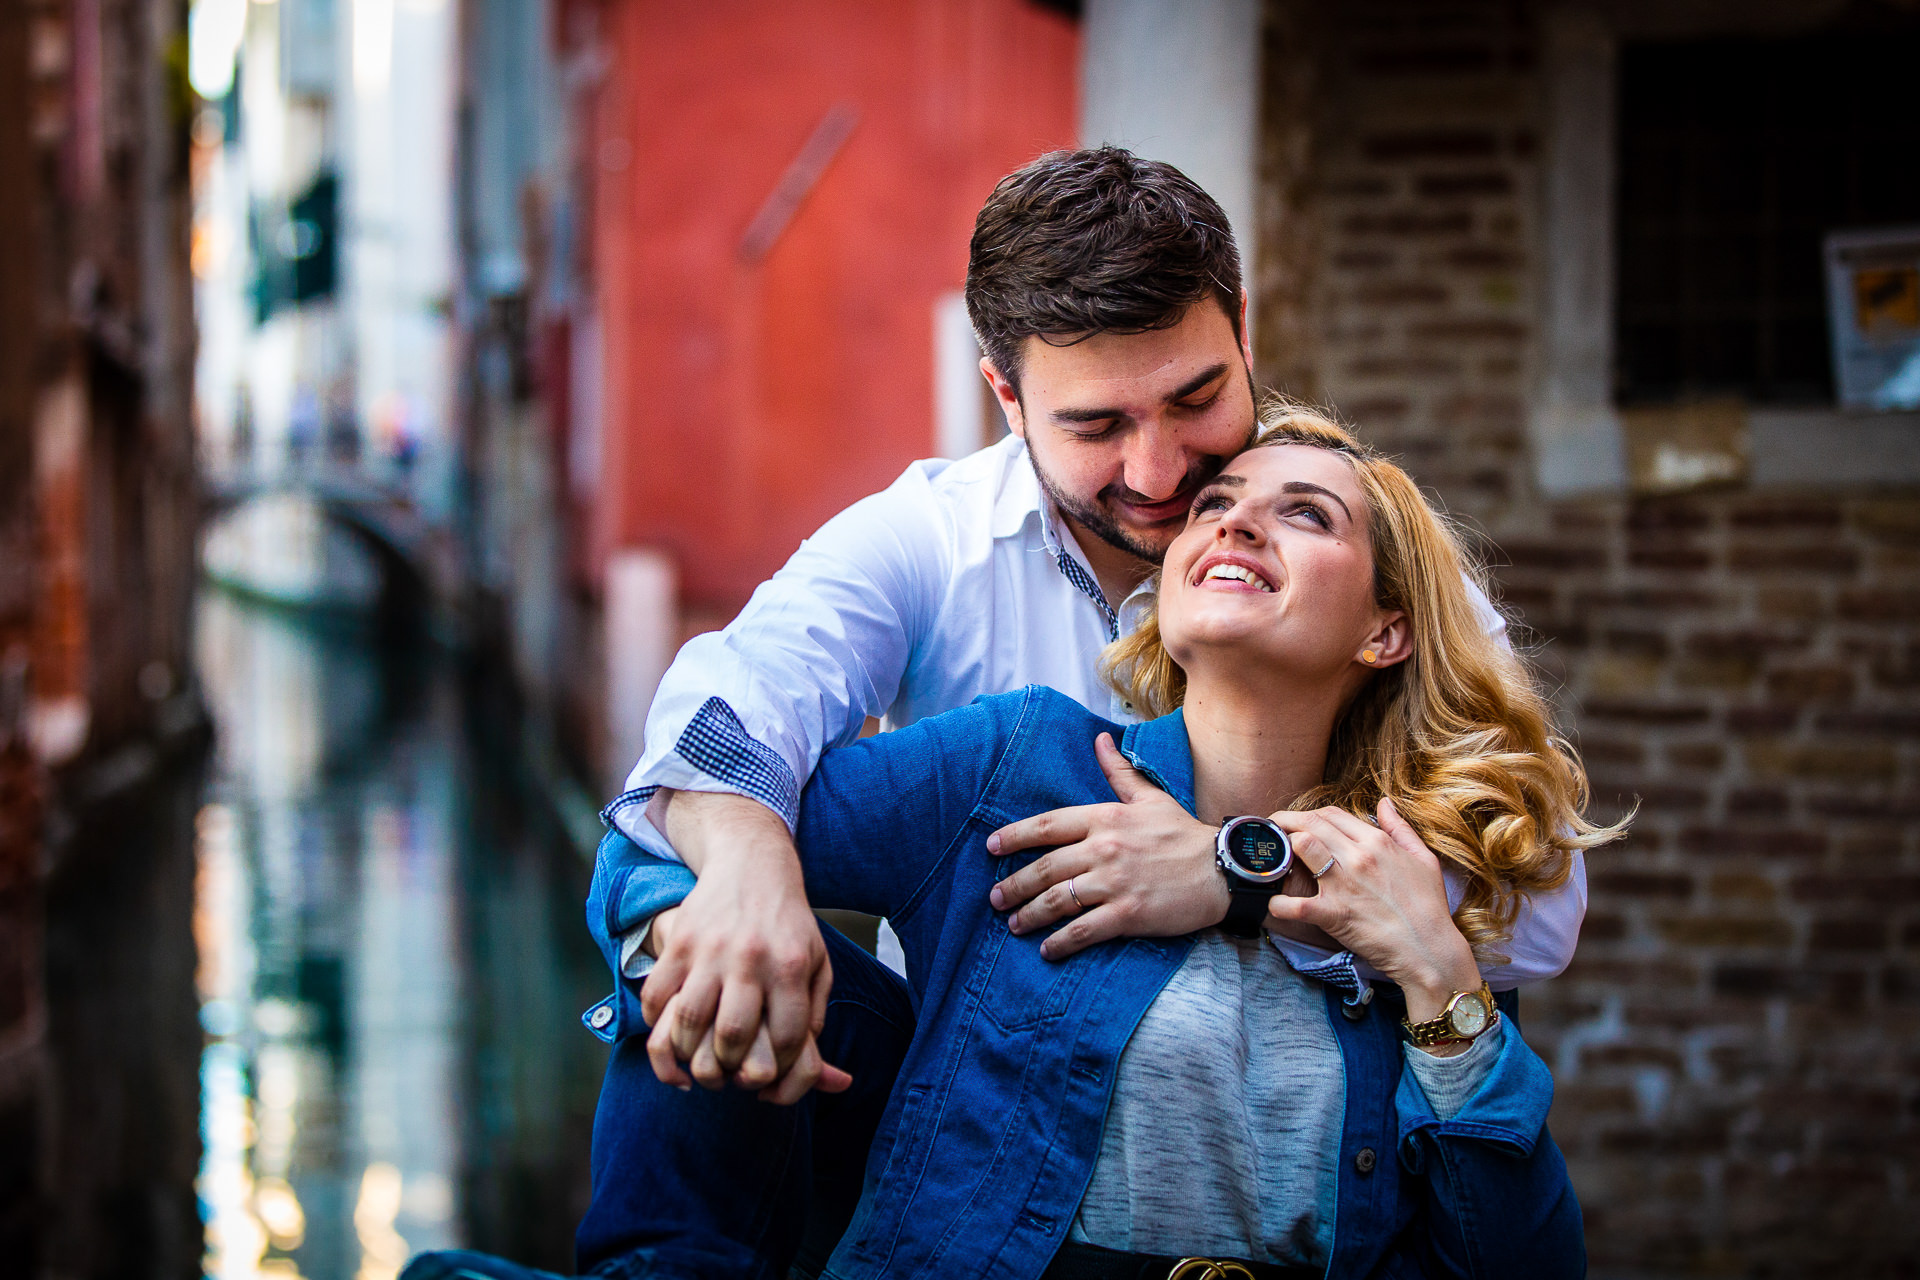 Couple photo session in Venice, Italy with Raluca + Costin by Destination Wedding Photographer Mihai Zaharia15